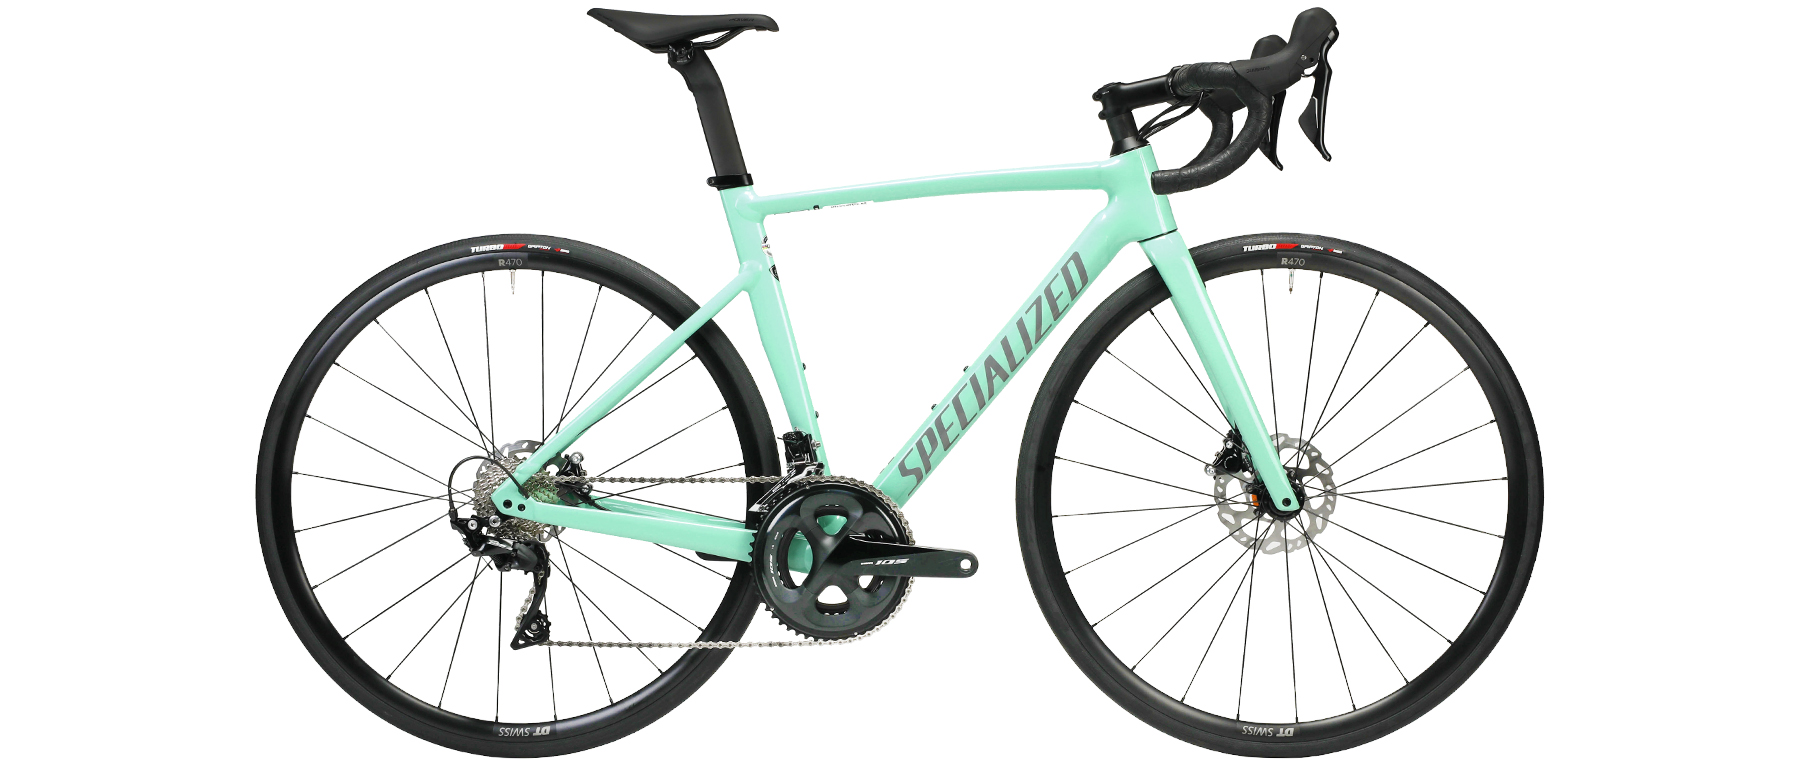 Specialized Allez Sprint Disc Comp Bicycle 2022